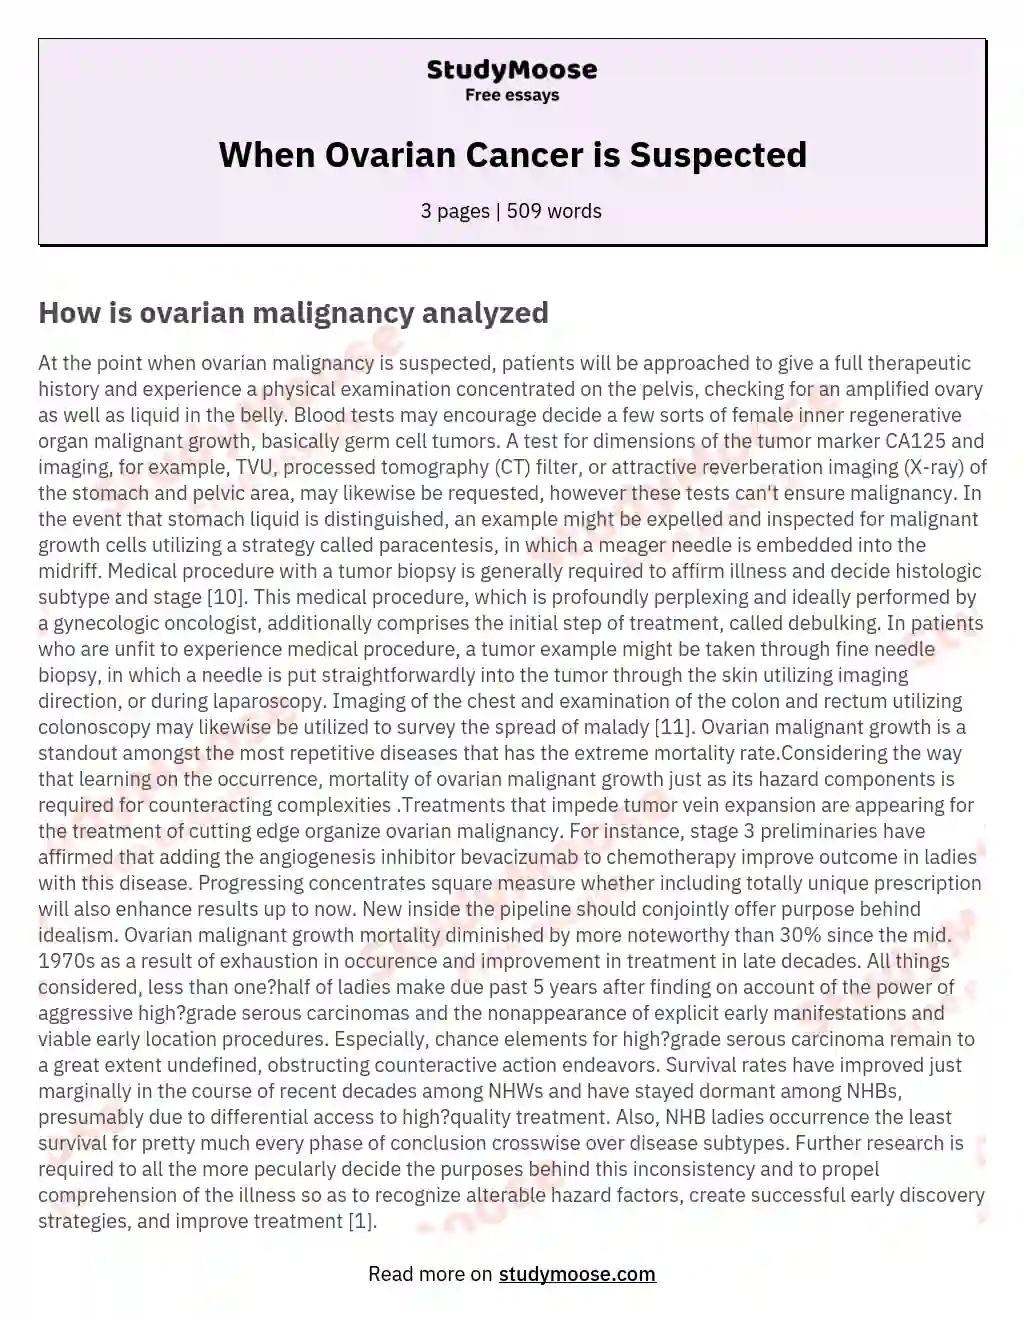 When Ovarian Cancer is Suspected essay